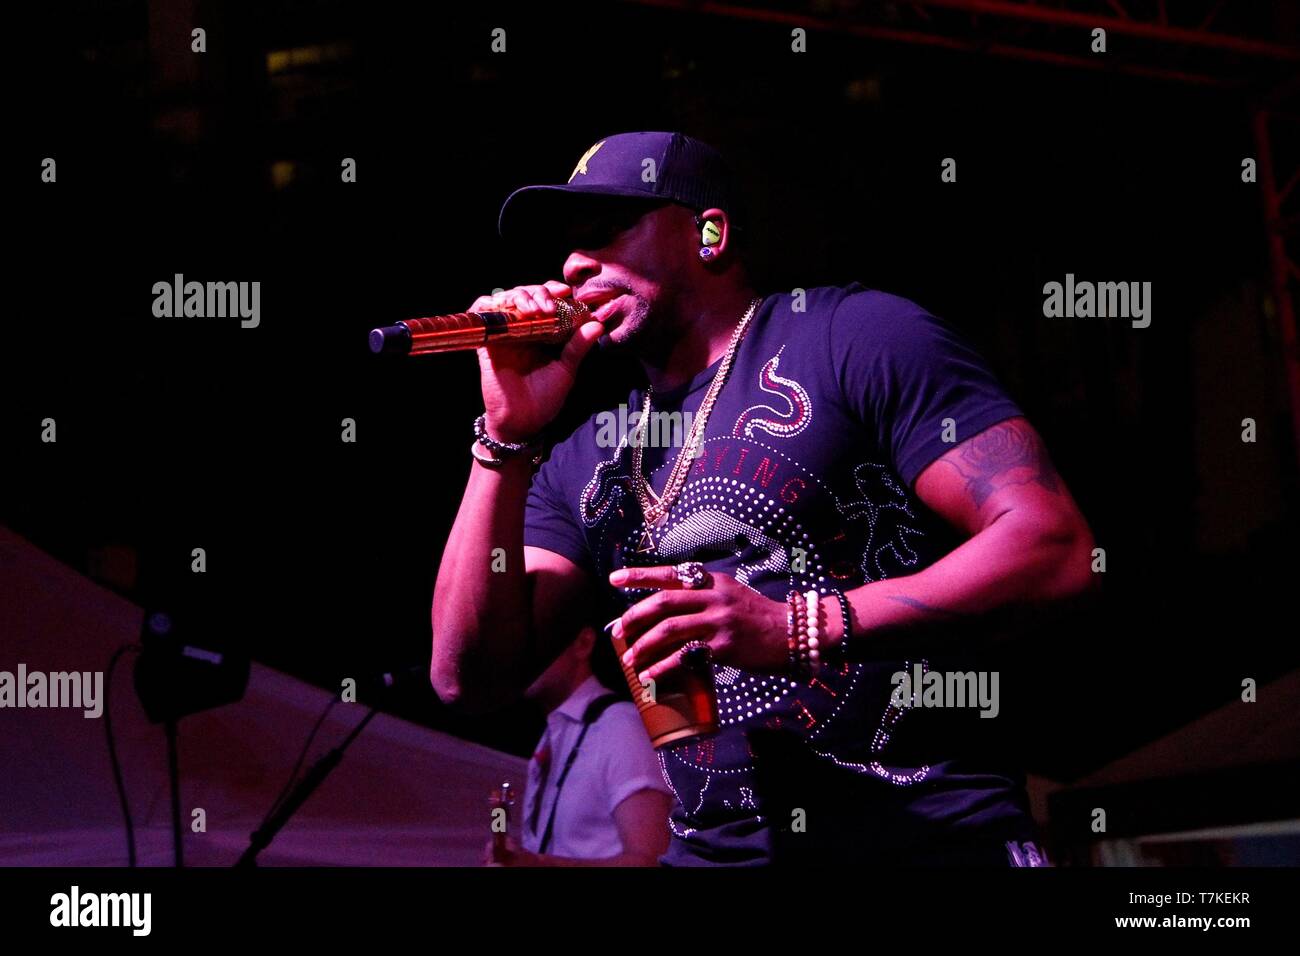 Las Vegas, NV, USA. 7th May, 2019. at arrivals for Flamingo GO Pool and 95.5 The Bull Country Concert Series with Jimmie Allen, Flamingo Las Vegas' GO Pool Dayclub, Las Vegas, NV May 7, 2019. Credit: JA/Everett Collection/Alamy Live News Stock Photo